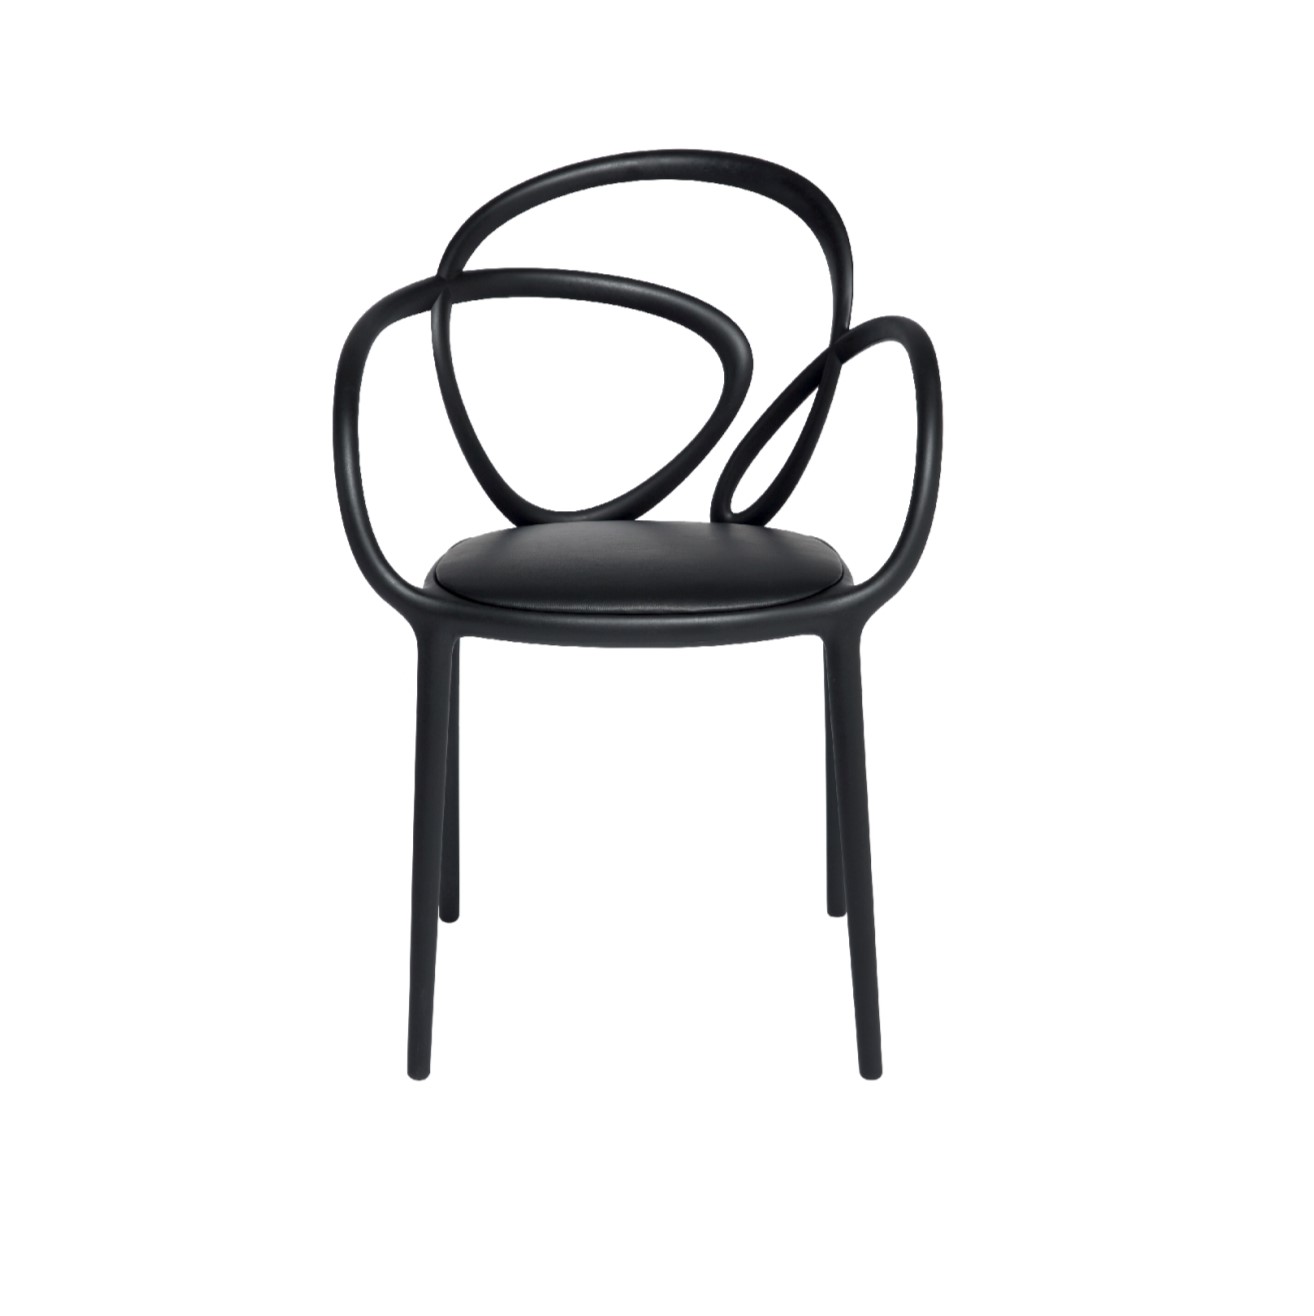 LOOP chair with cushion - set of 2 pieces